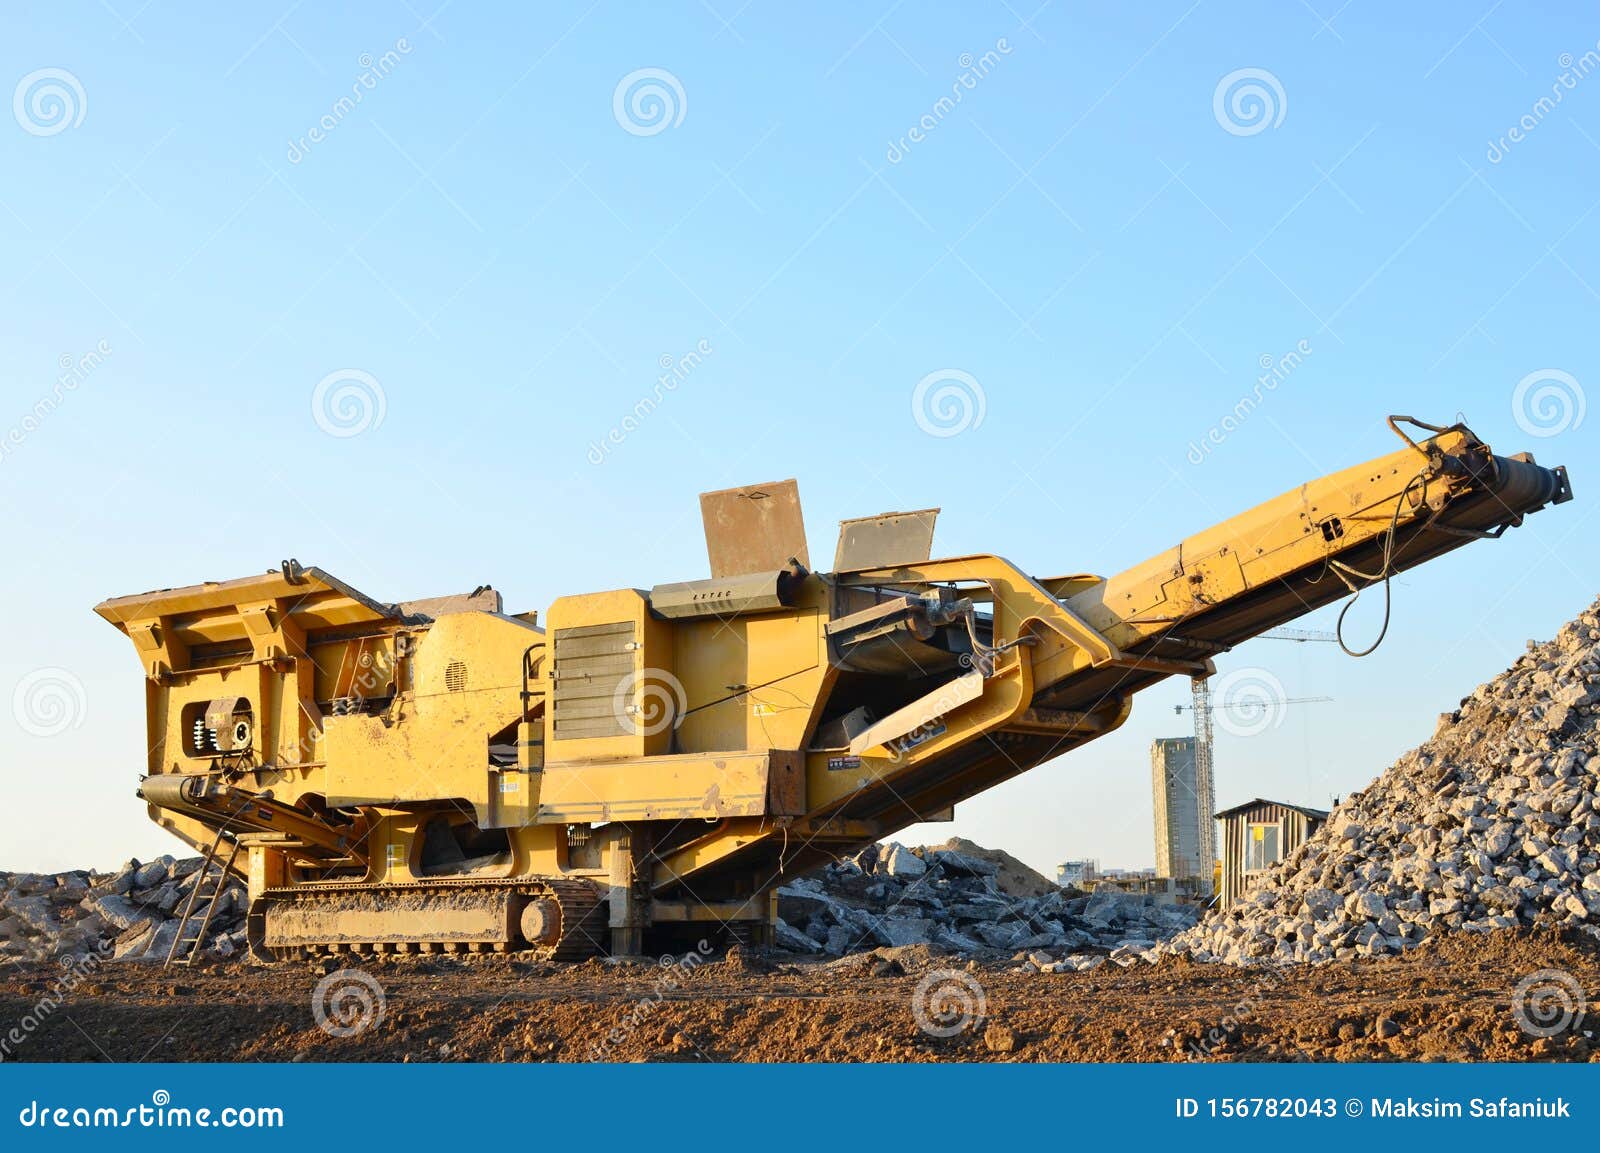 https://thumbs.dreamstime.com/z/mobile-stone-crusher-machine-construction-site-mining-quarry-crushing-old-concrete-slabs-gravel-subsequent-156782043.jpg